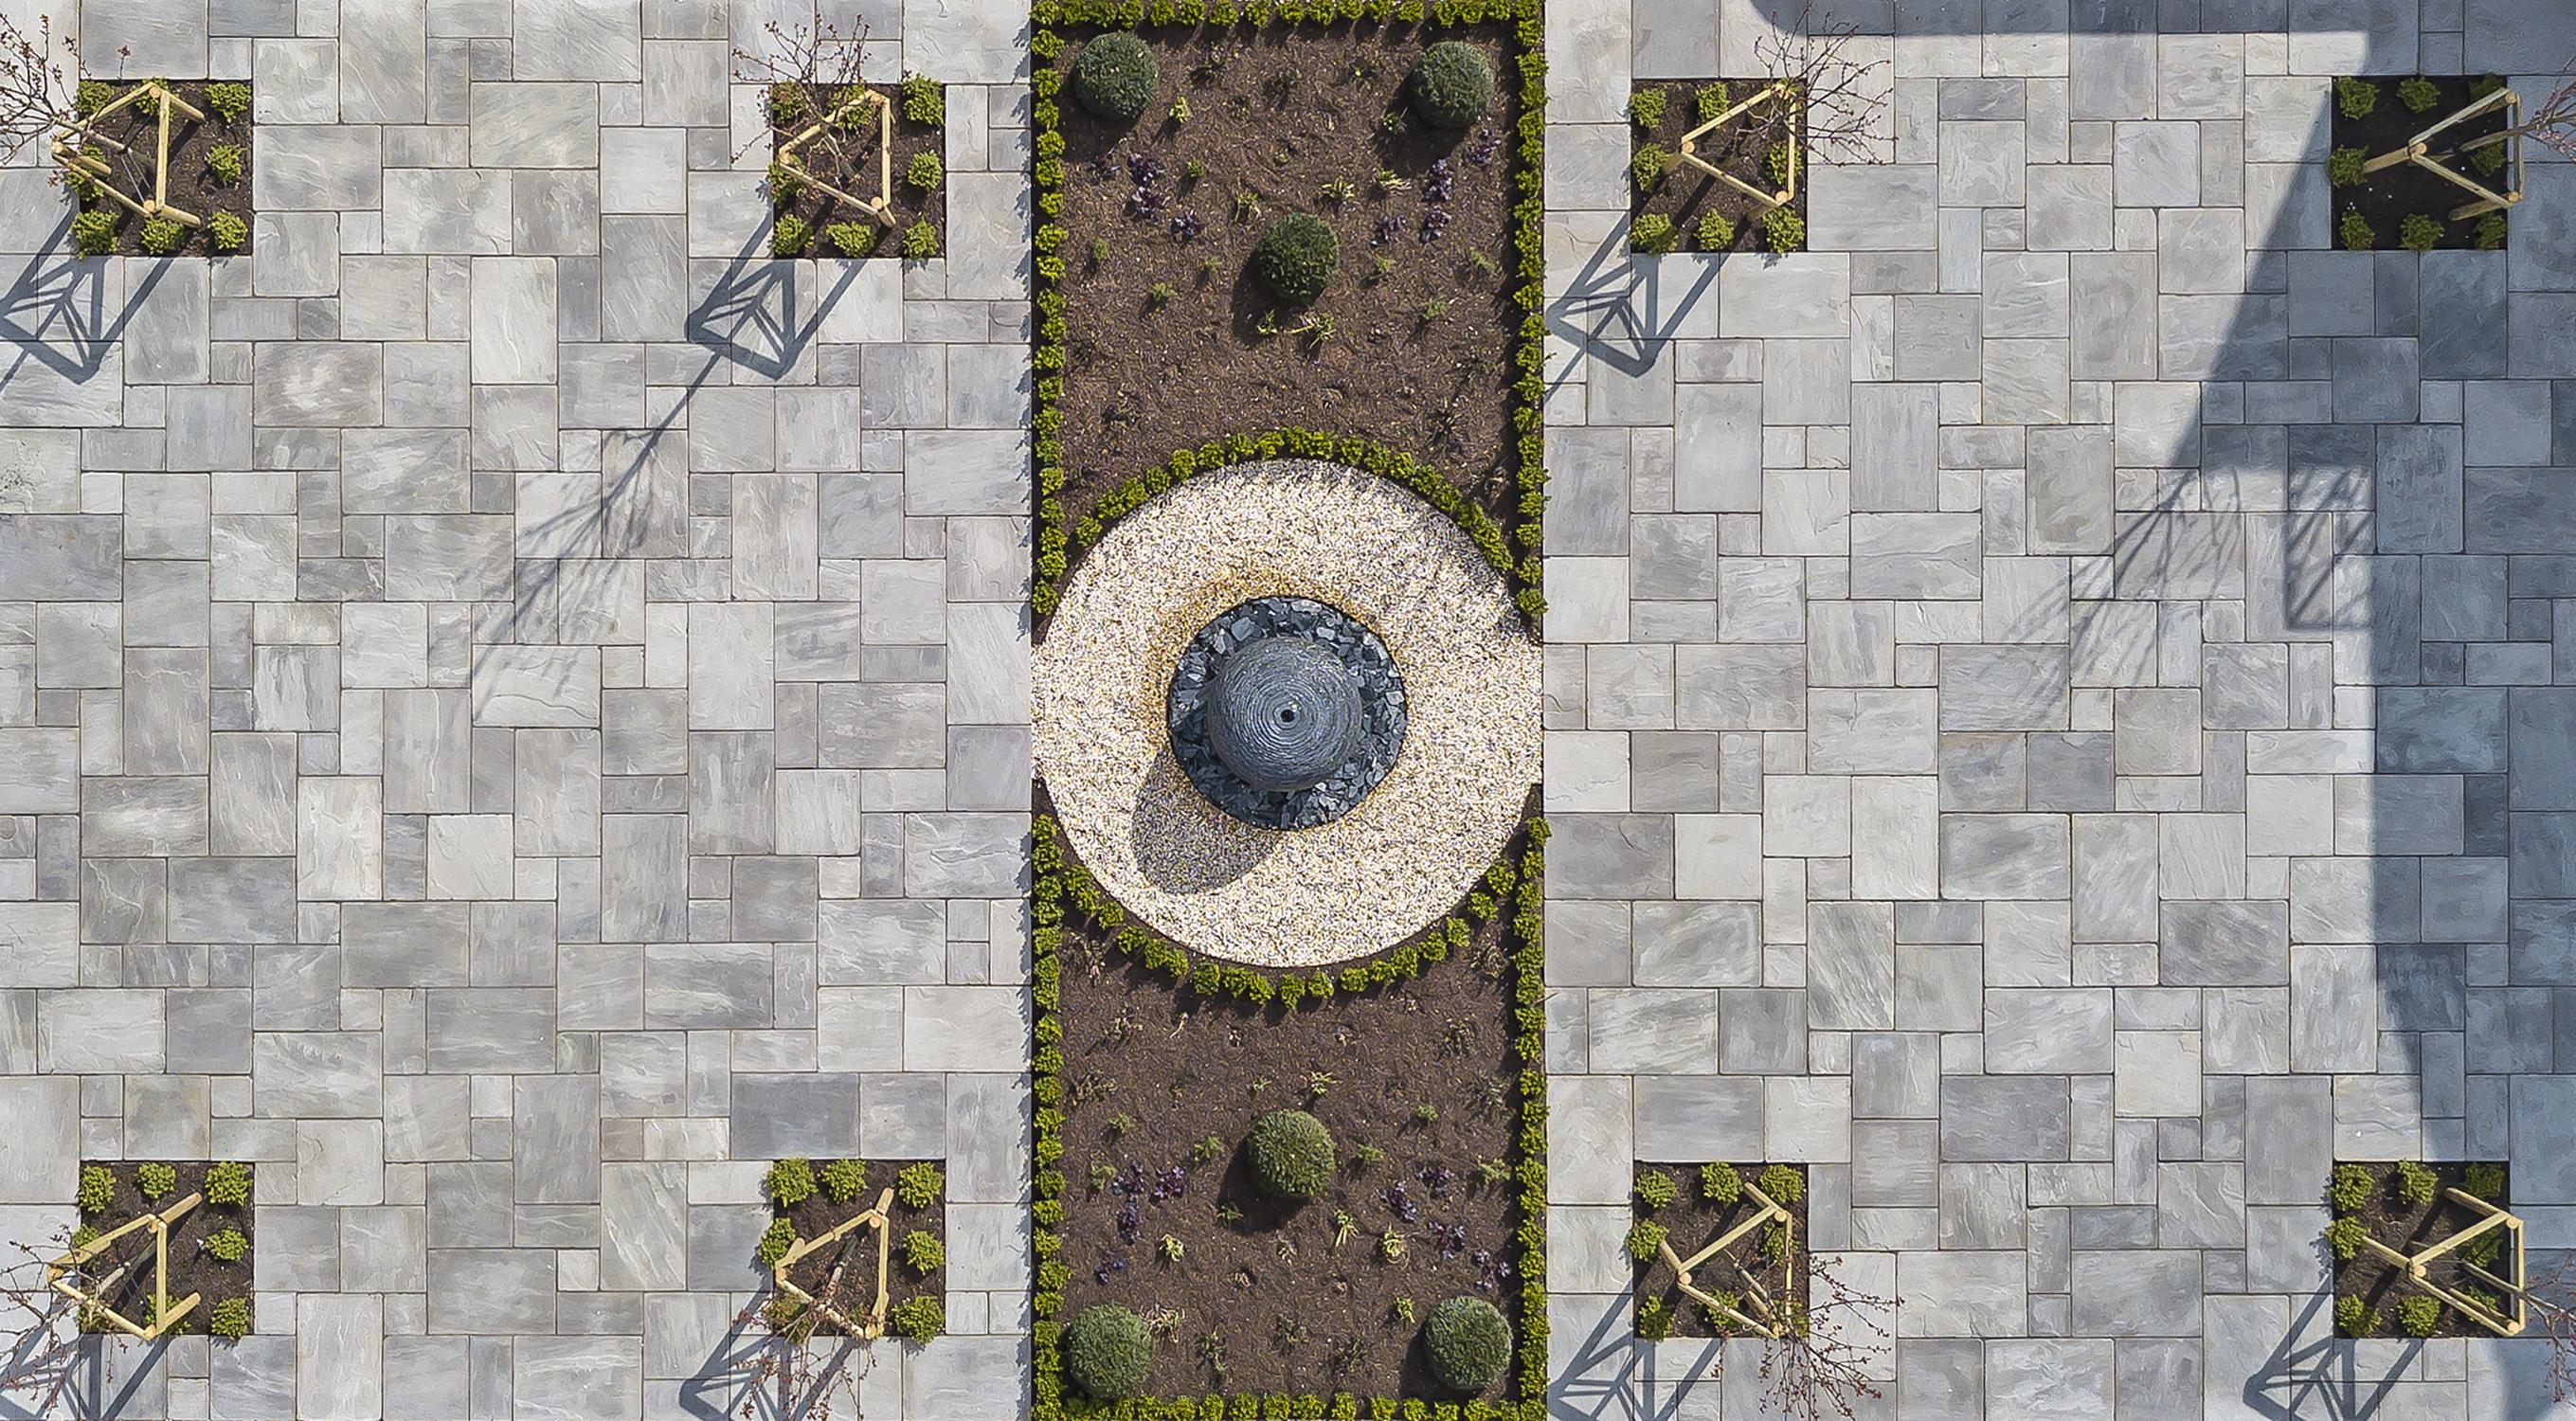 1m Grey Watersphere™ set as a focal point in this large walled, paved garden. The drone photo showing the excellent symmetry in this garden.